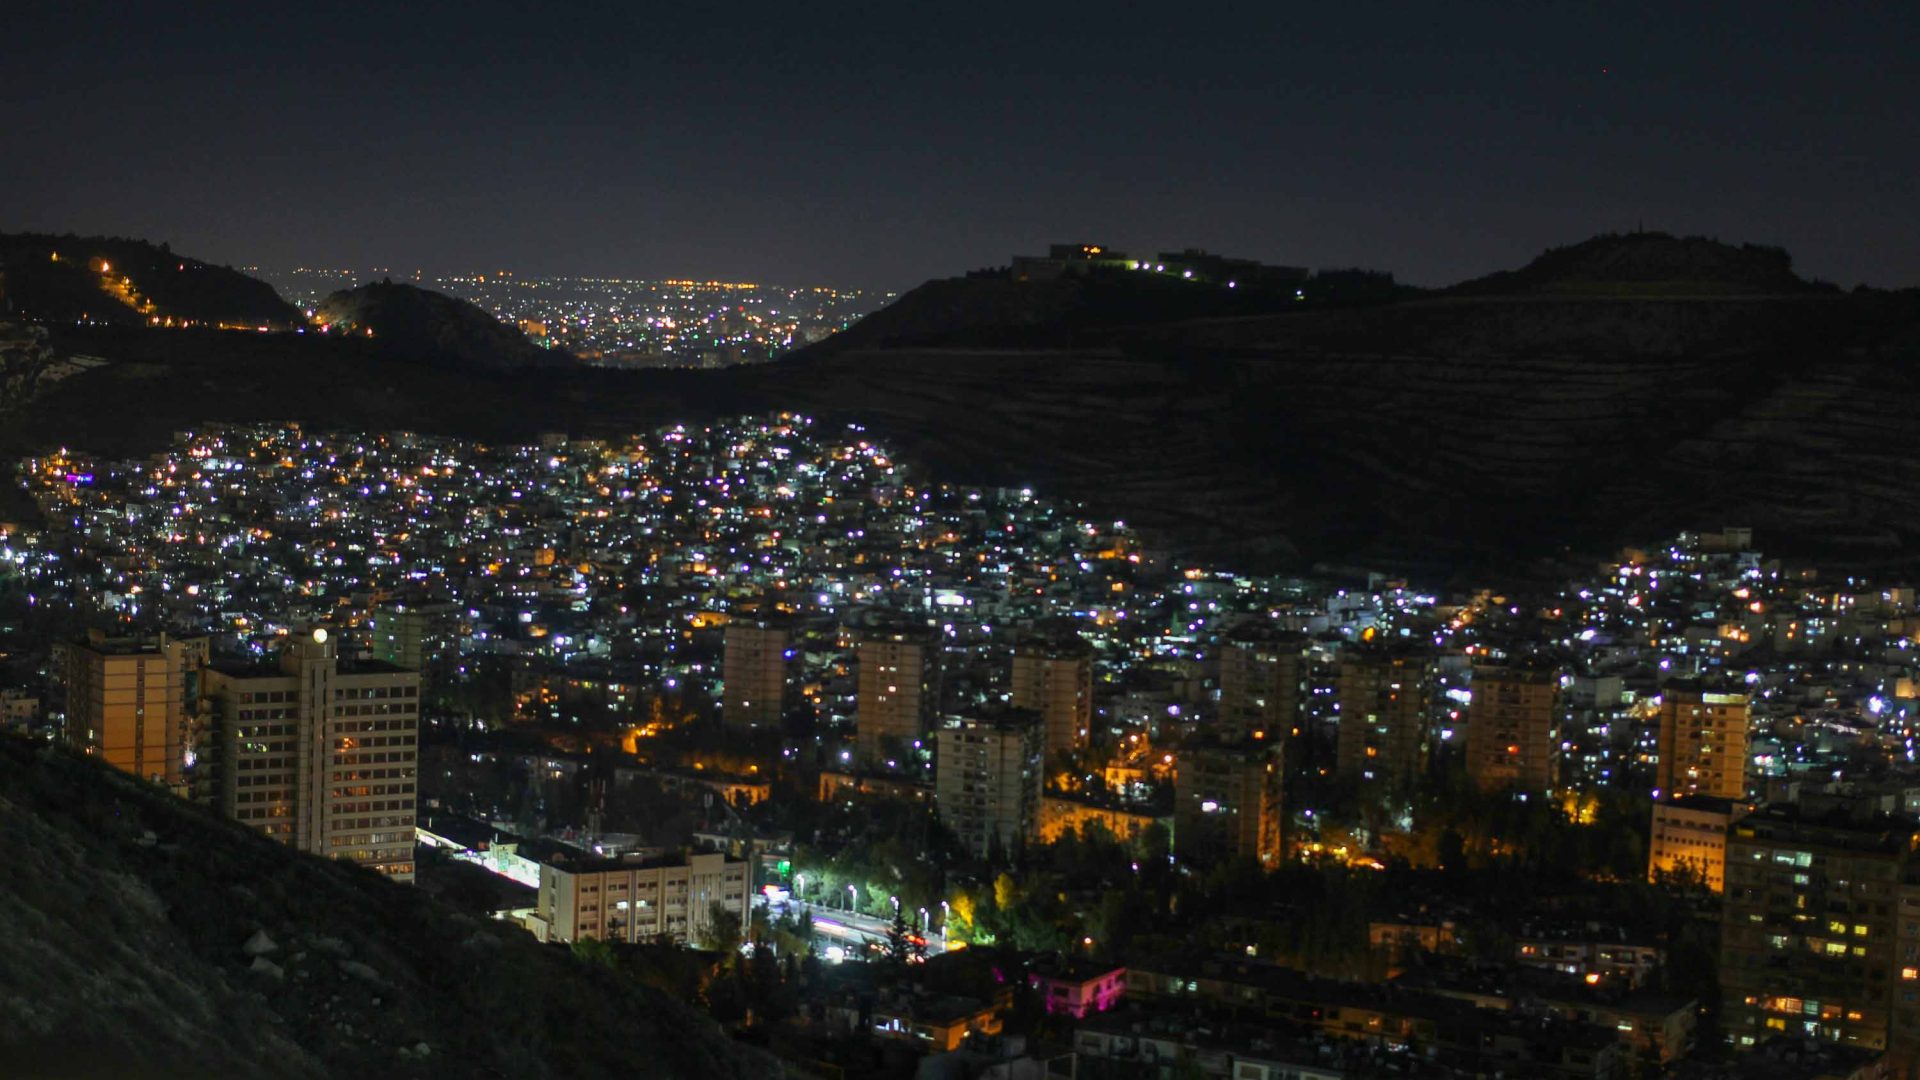 Damascus, Syria, at night. The city, lit up by lights, is surrounded by mountains.